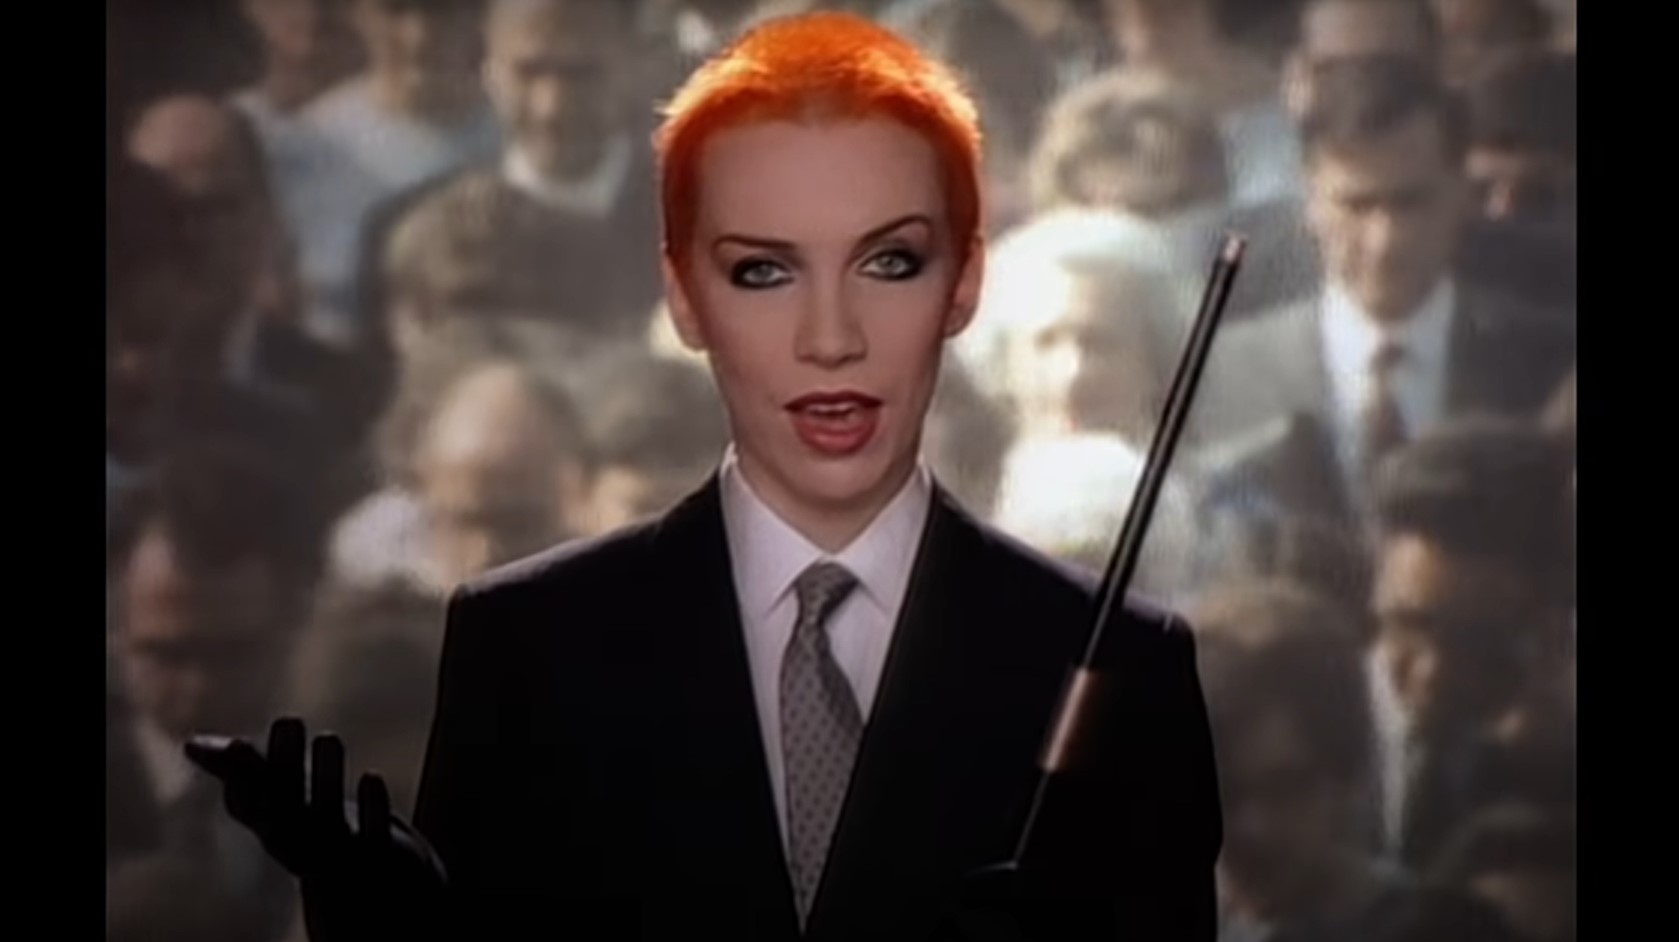 80s Music Video Of The Day: Eurythmics - Sweet Dreams (Are Made Of This)